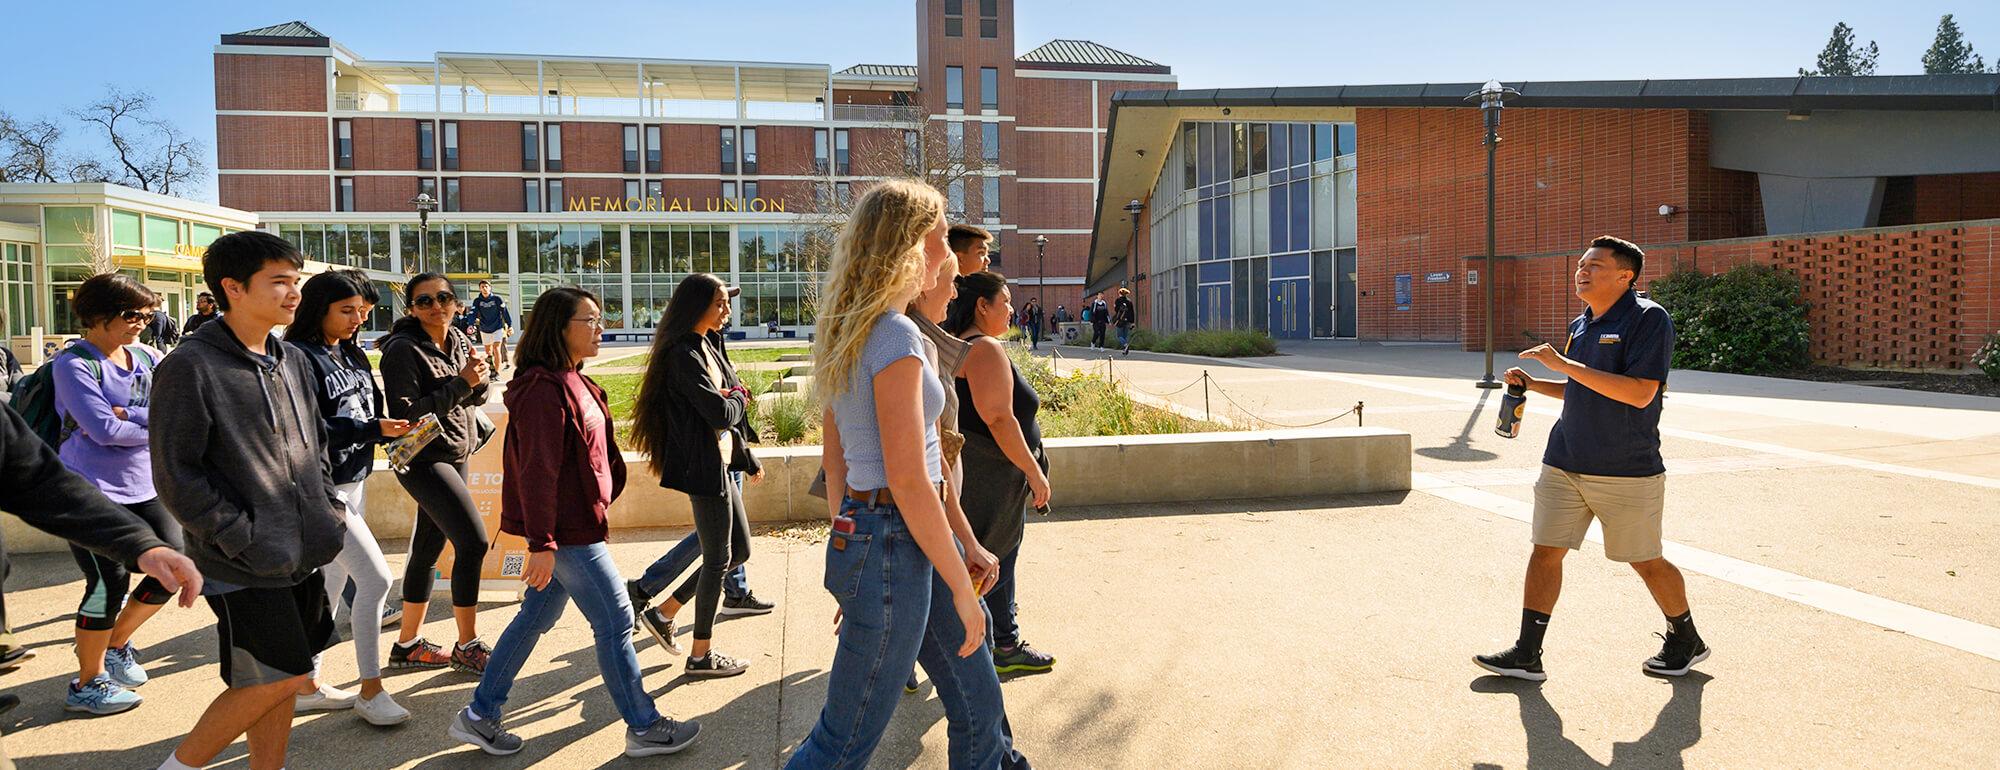 A UC Davis tour guide walks backward through campus highliting campus sights to his audience